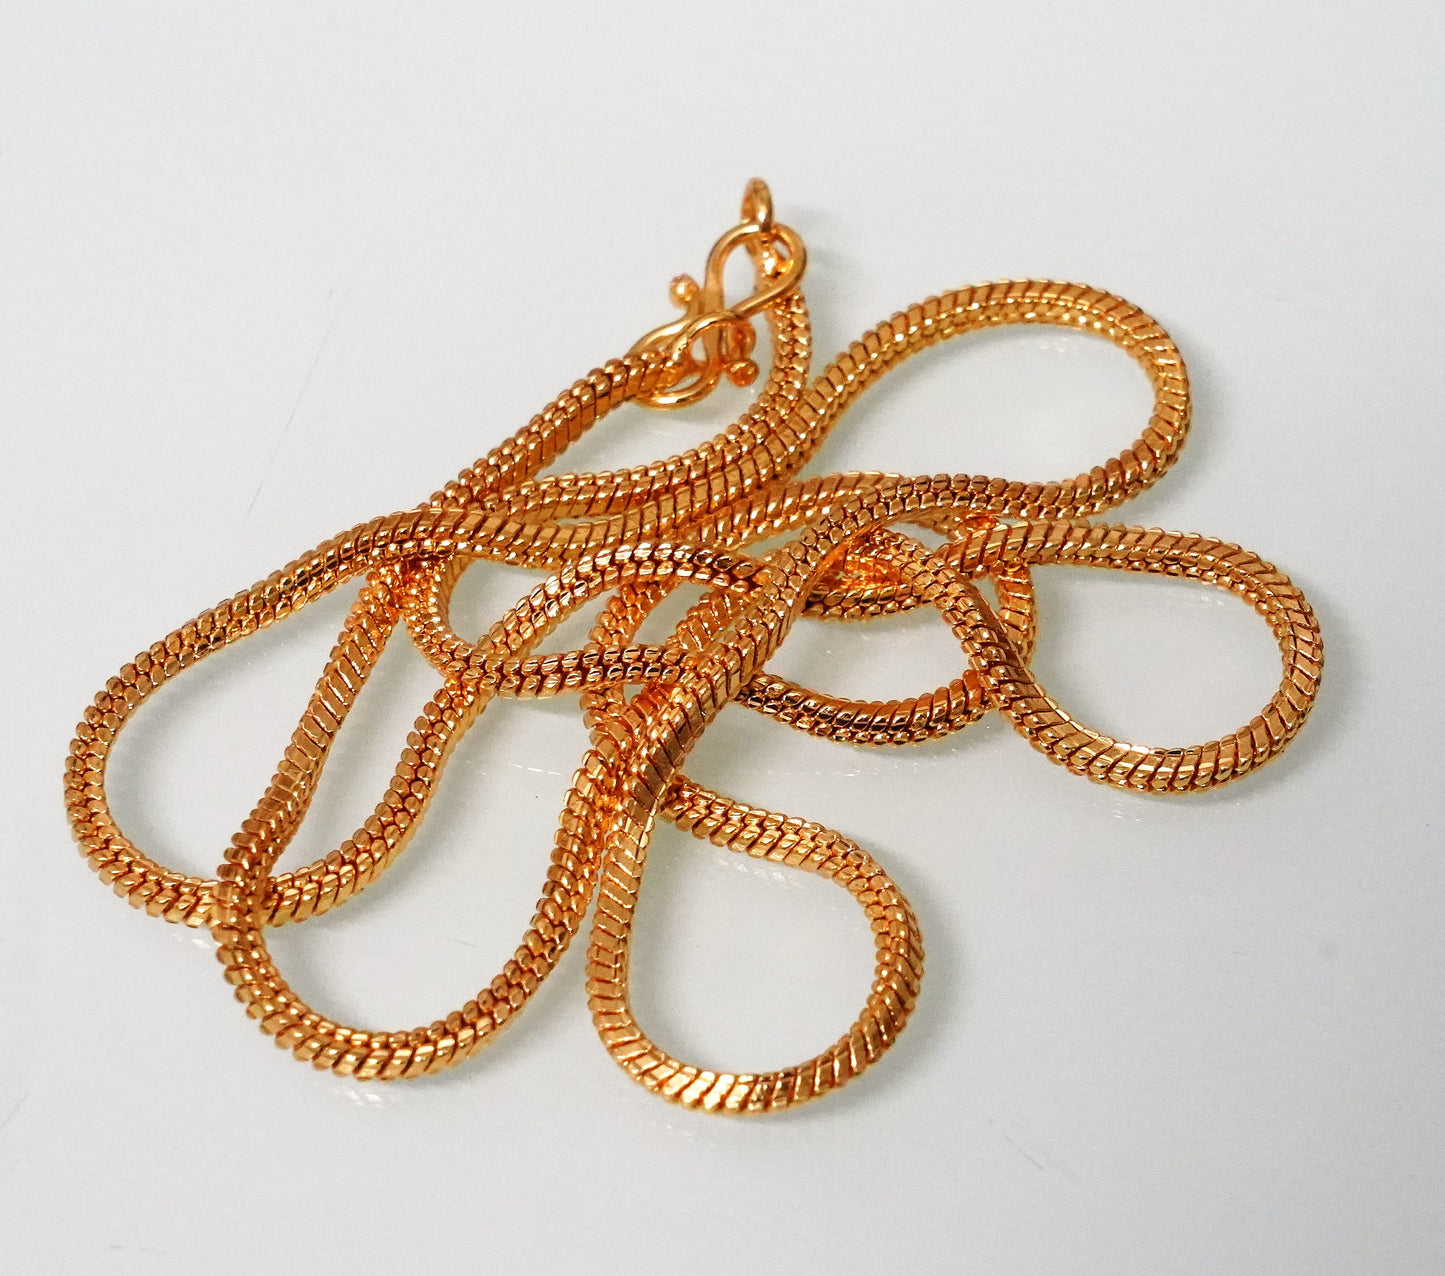 1 gram 22kt Gold plated Chain